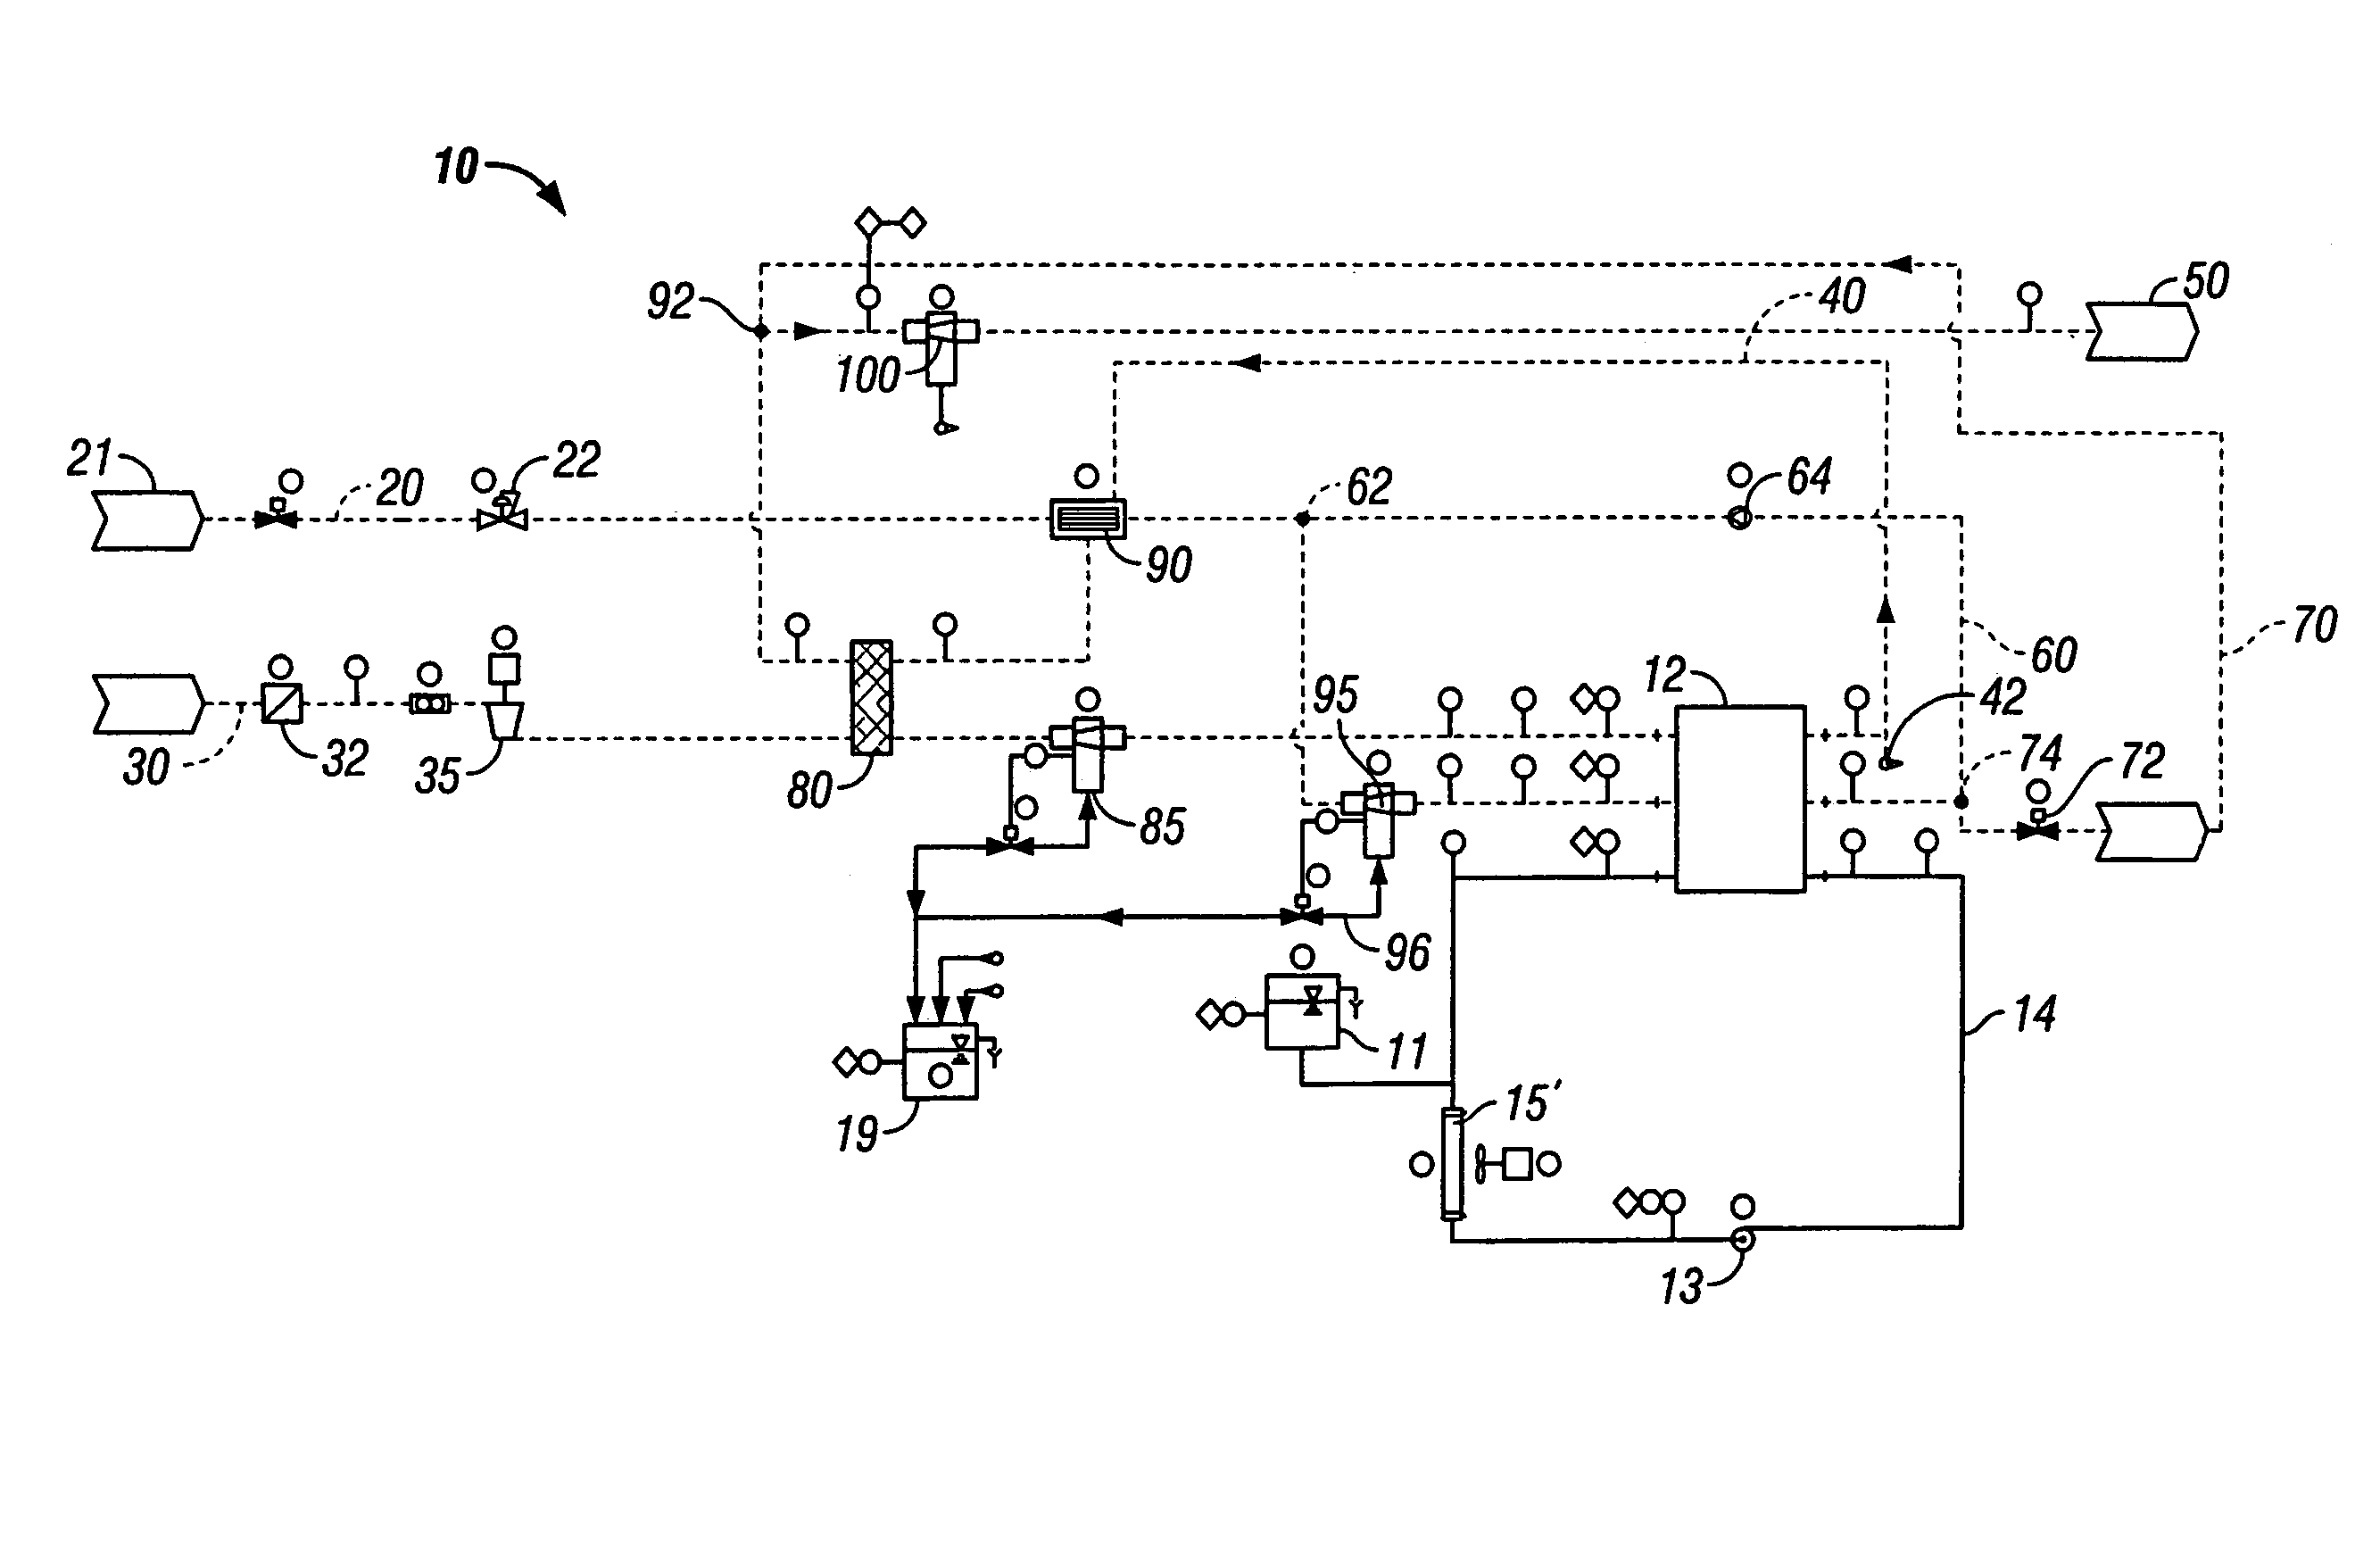 Fuel cell system and method of operation to reduce parasitic load of fuel cell peripherals